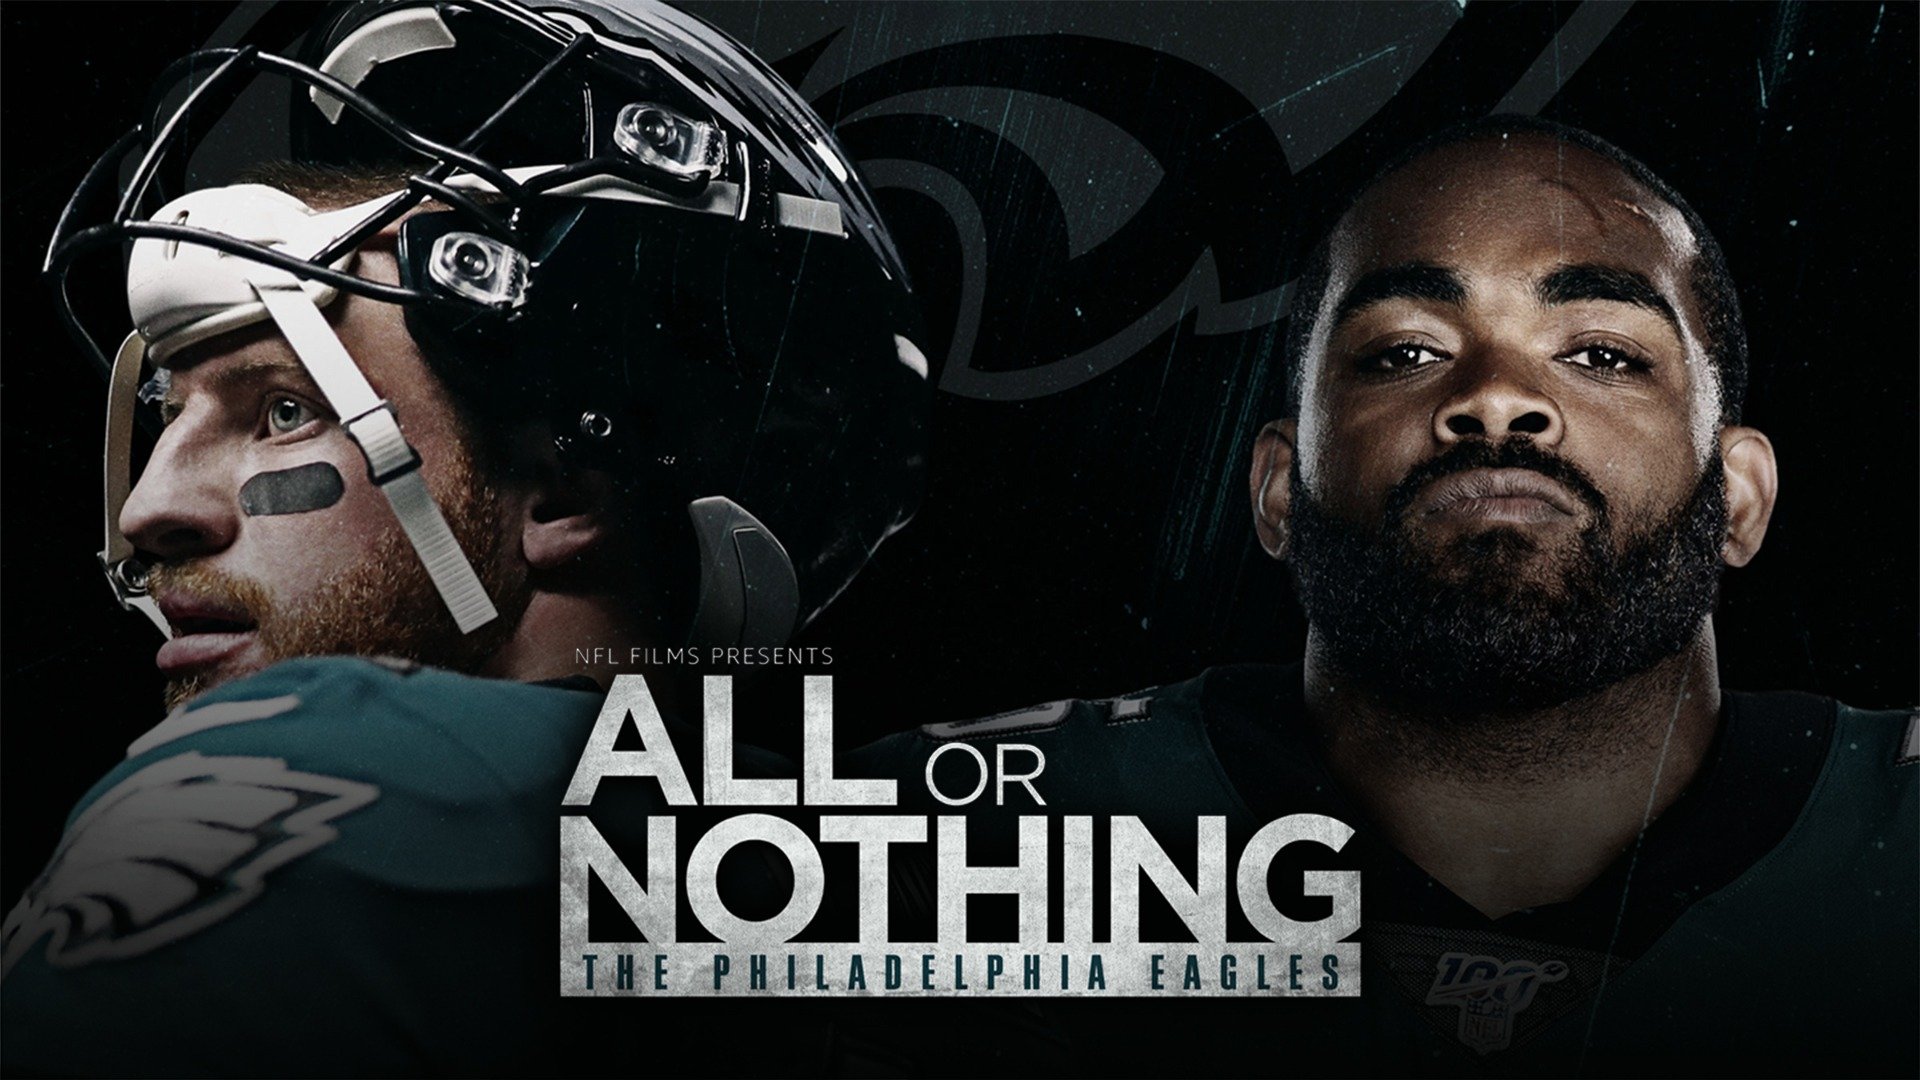 All or Nothing - Amazon Prime Video Docuseries